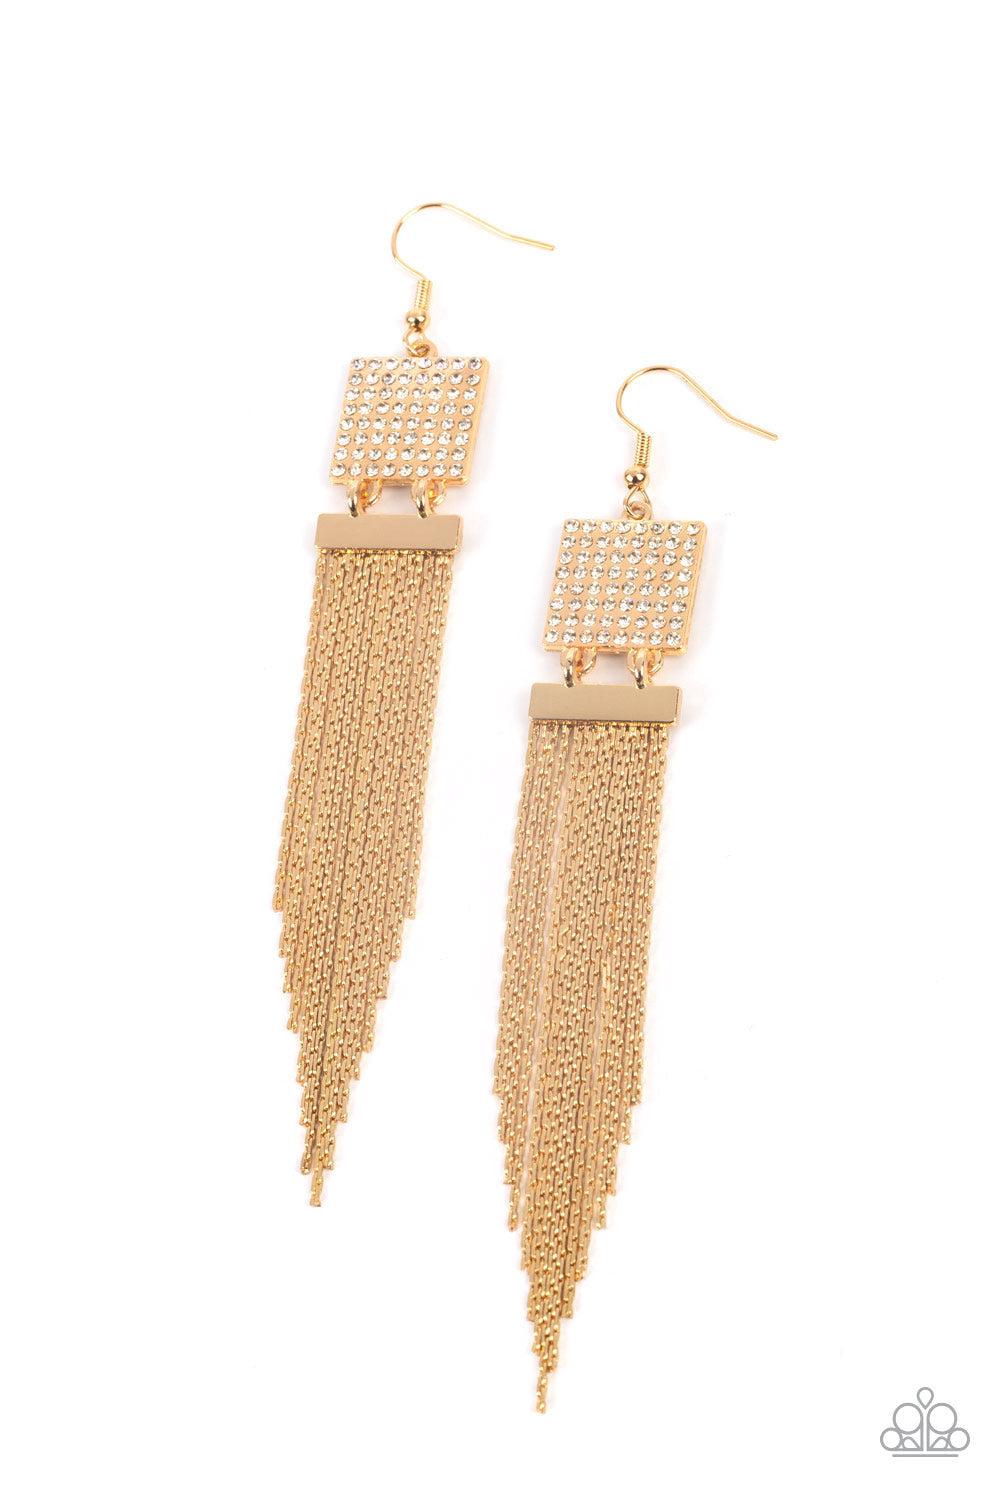 Dramatically Deco Gold Earrings - Paparazzi Accessories- lightbox - CarasShop.com - $5 Jewelry by Cara Jewels